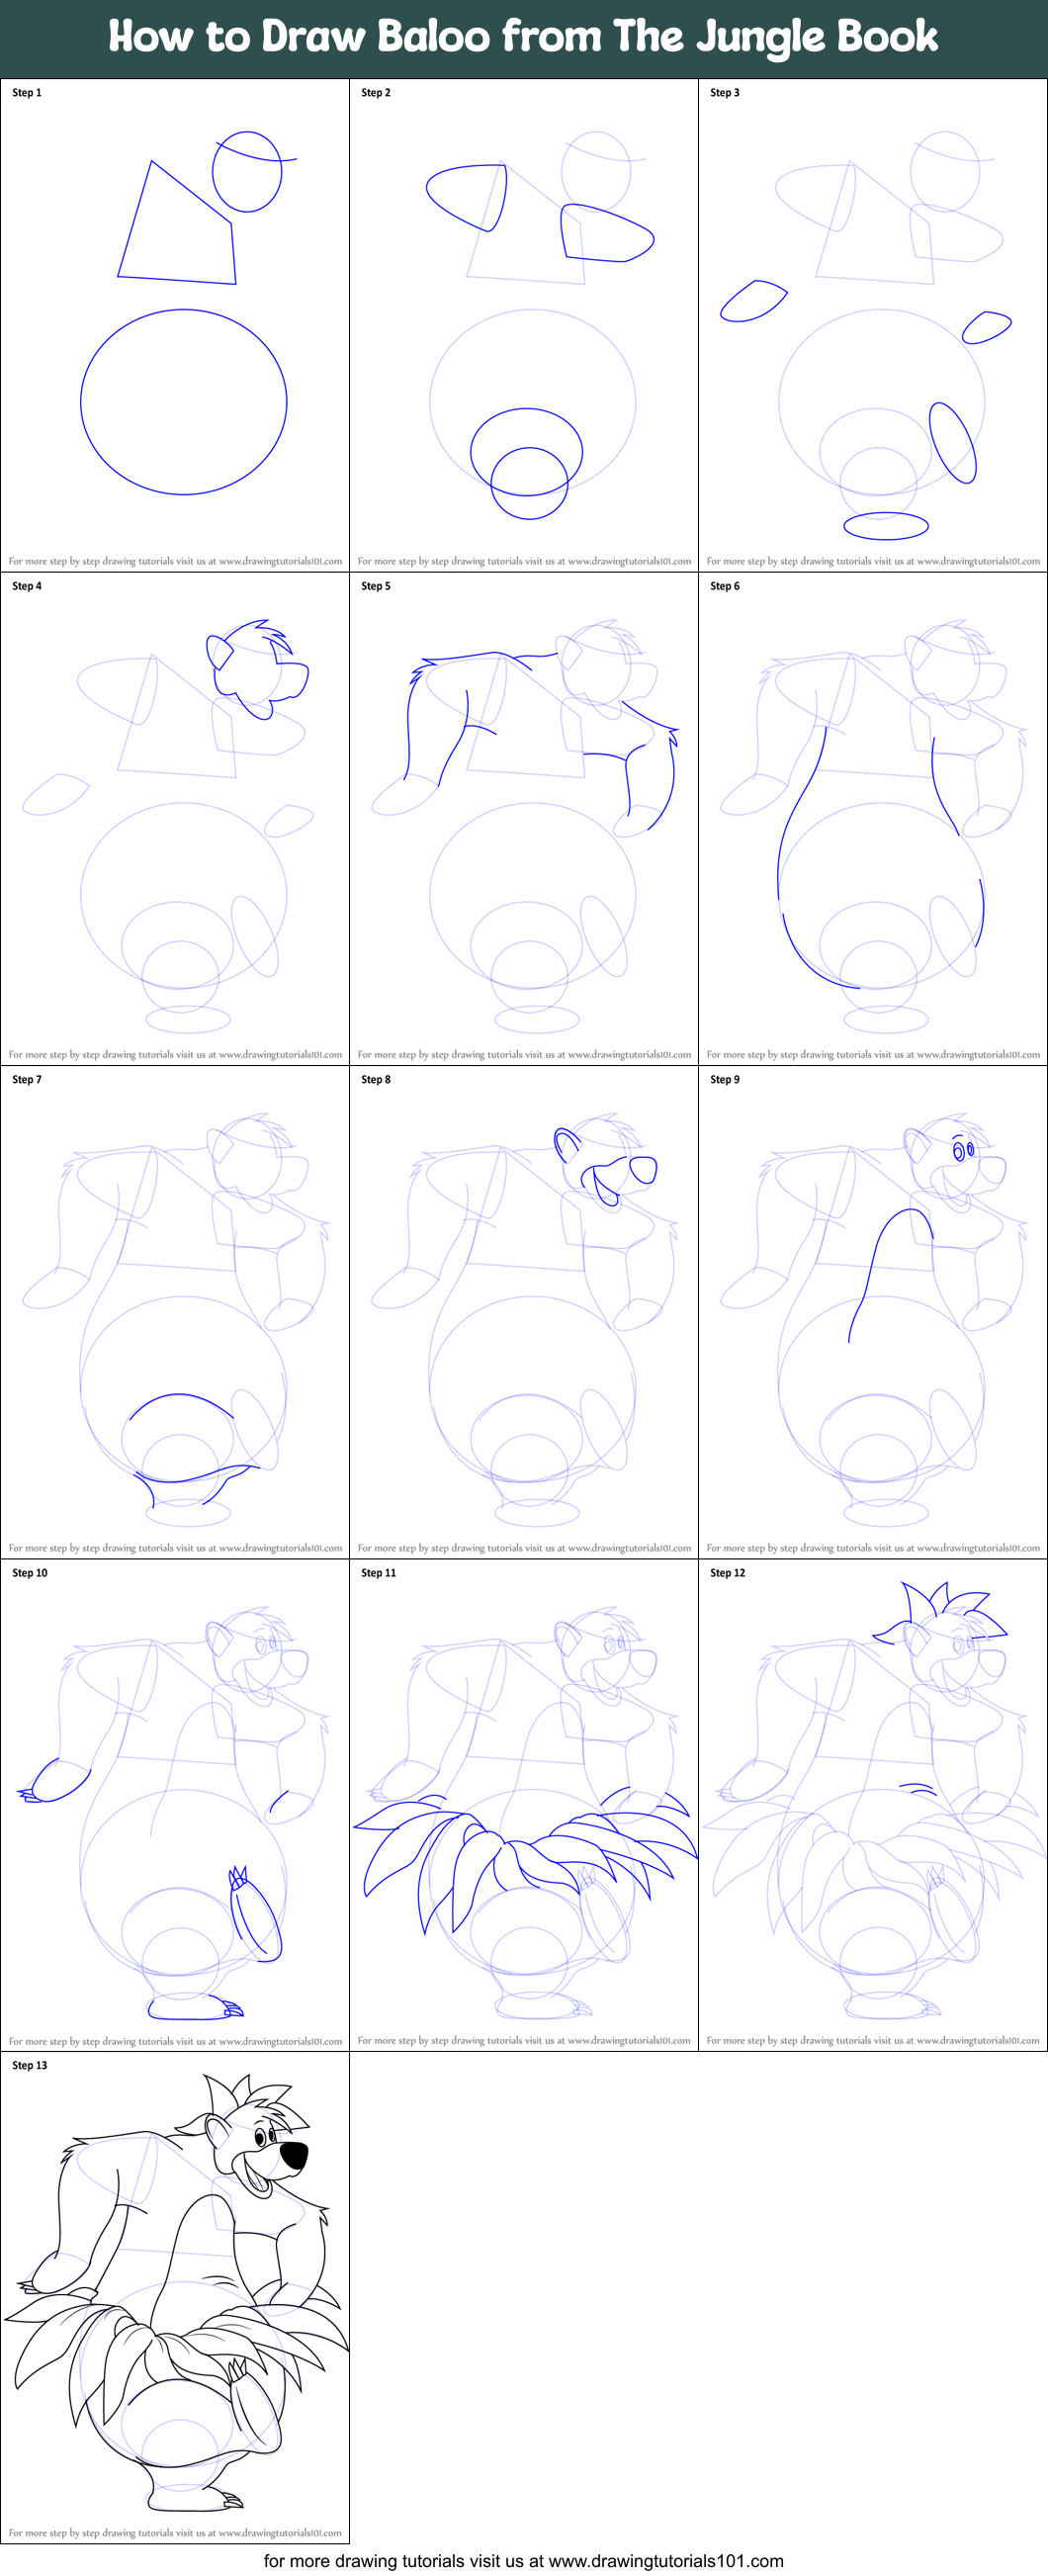 How to Draw Baloo from The Jungle Book (The Jungle Book) Step by Step ...